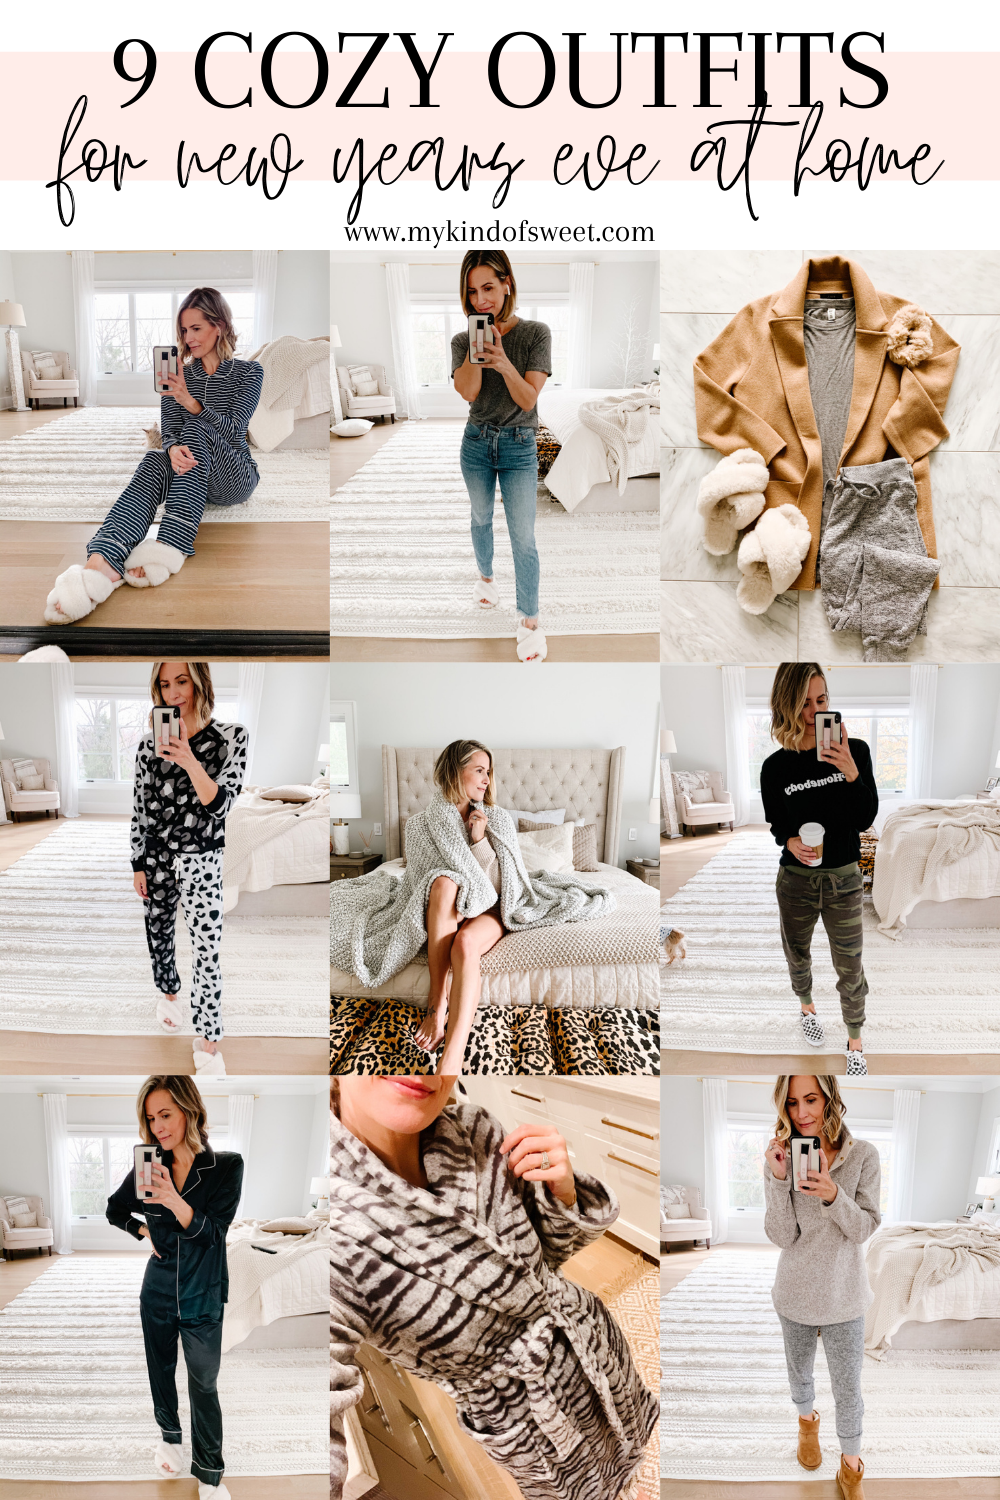 9 Cozy NYE Outfits For Staying At Home - My Kind of Sweet